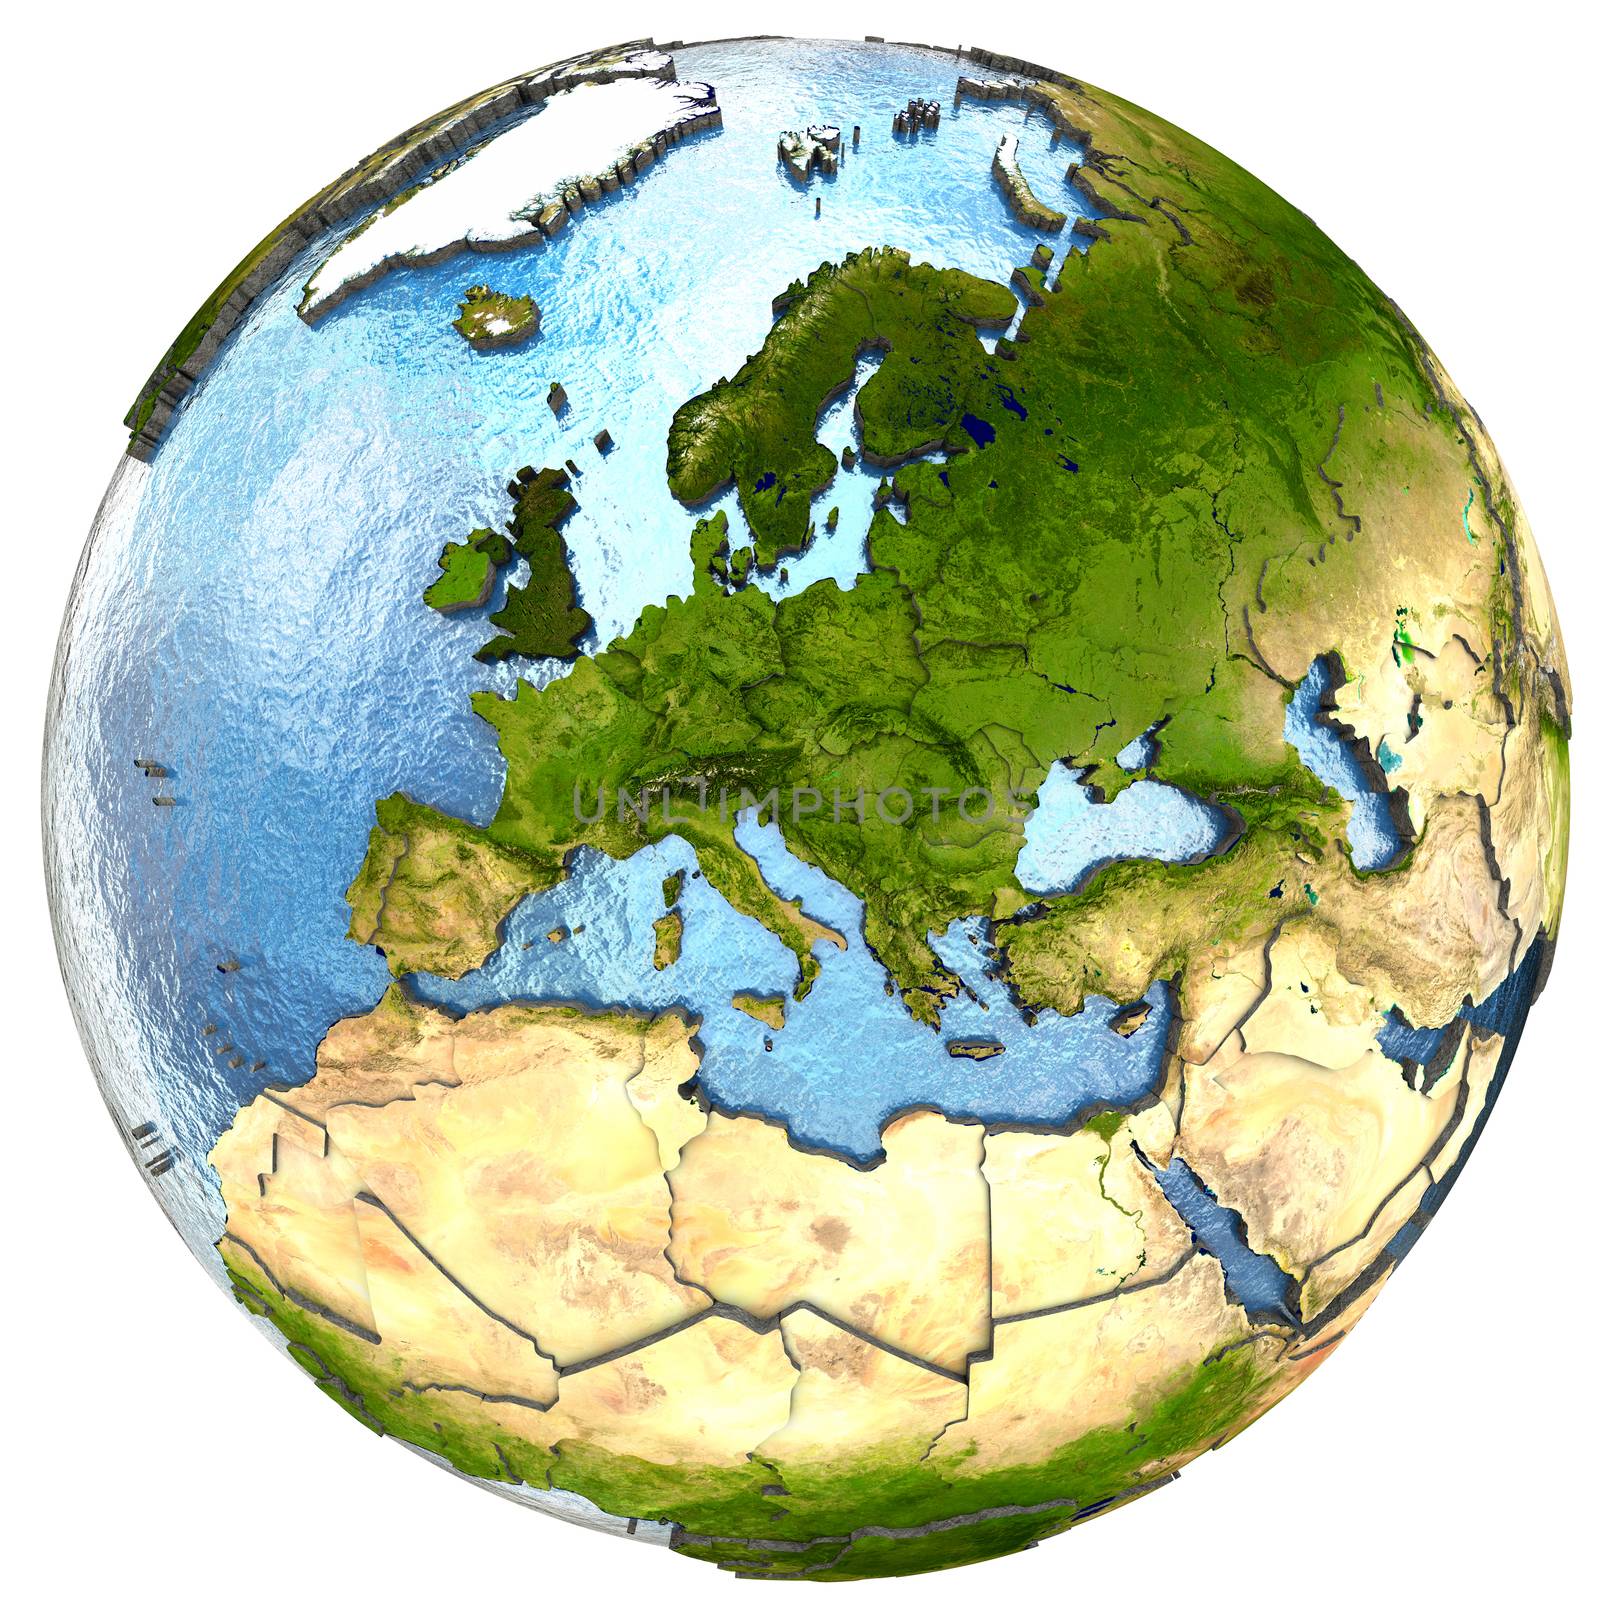 Europe on Earth by Harvepino